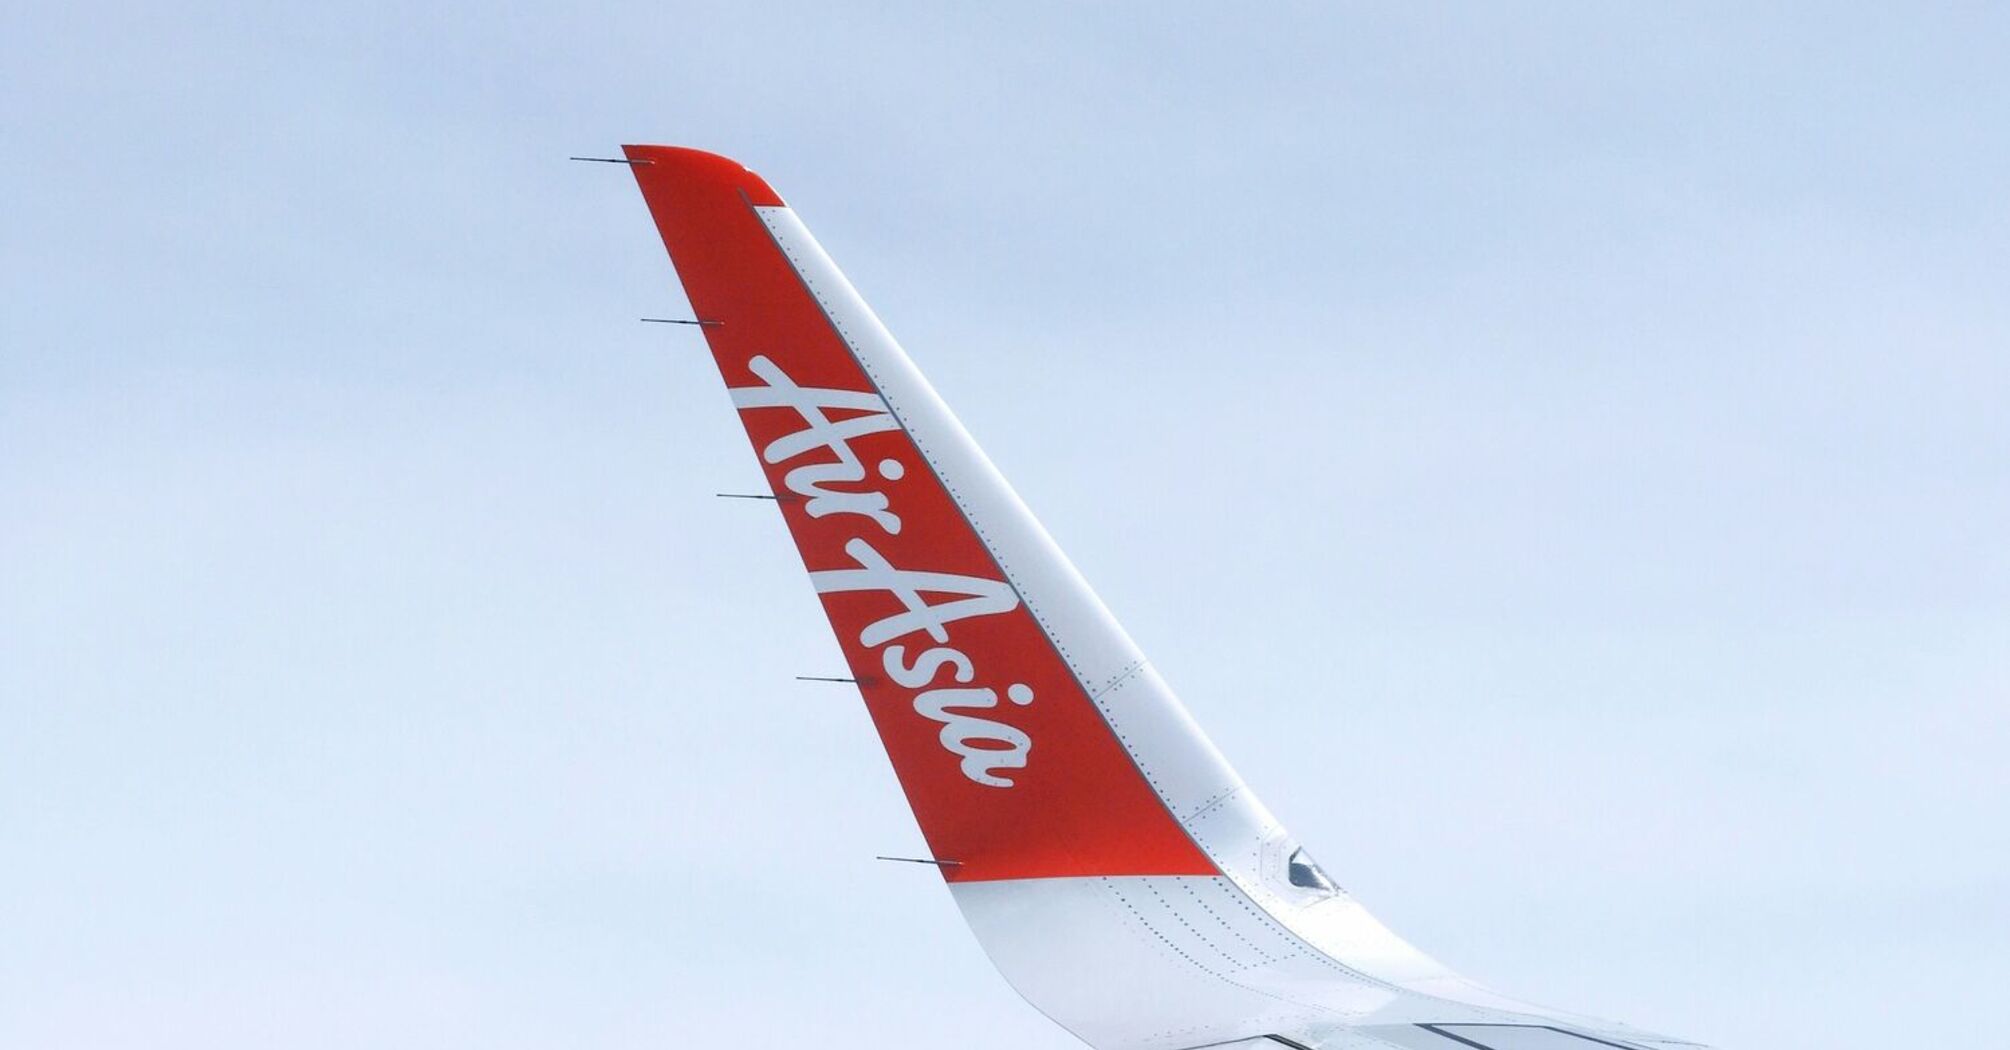 The wing of an AirAsia airplane against a clear sky, focusing on the wingtip with the AirAsia logo